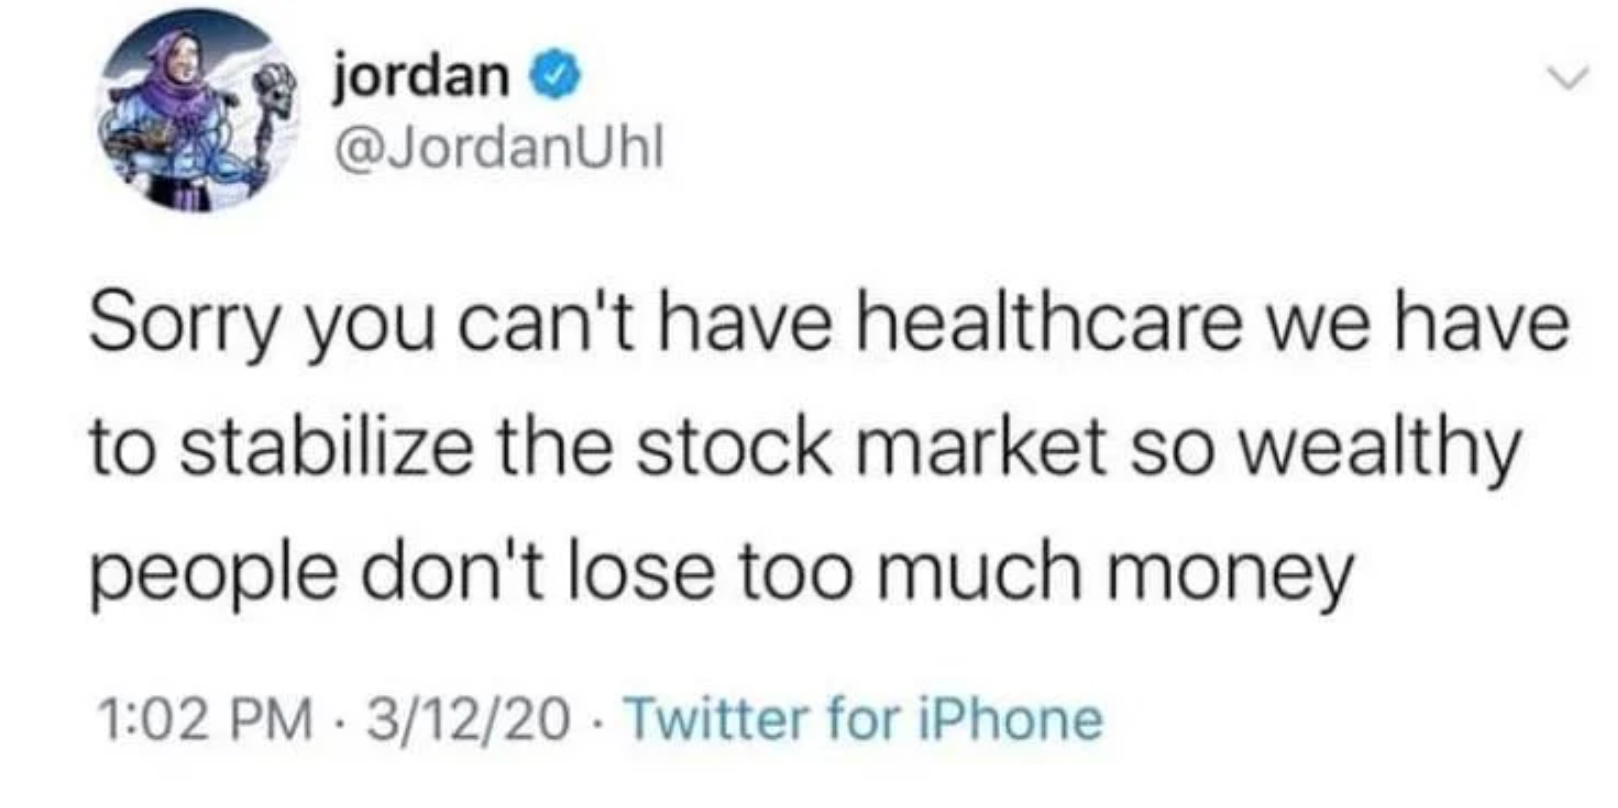 nba players old tweets - jordan Sorry you can't have healthcare we have to stabilize the stock market so wealthy people don't lose too much money 31220 Twitter for iPhone